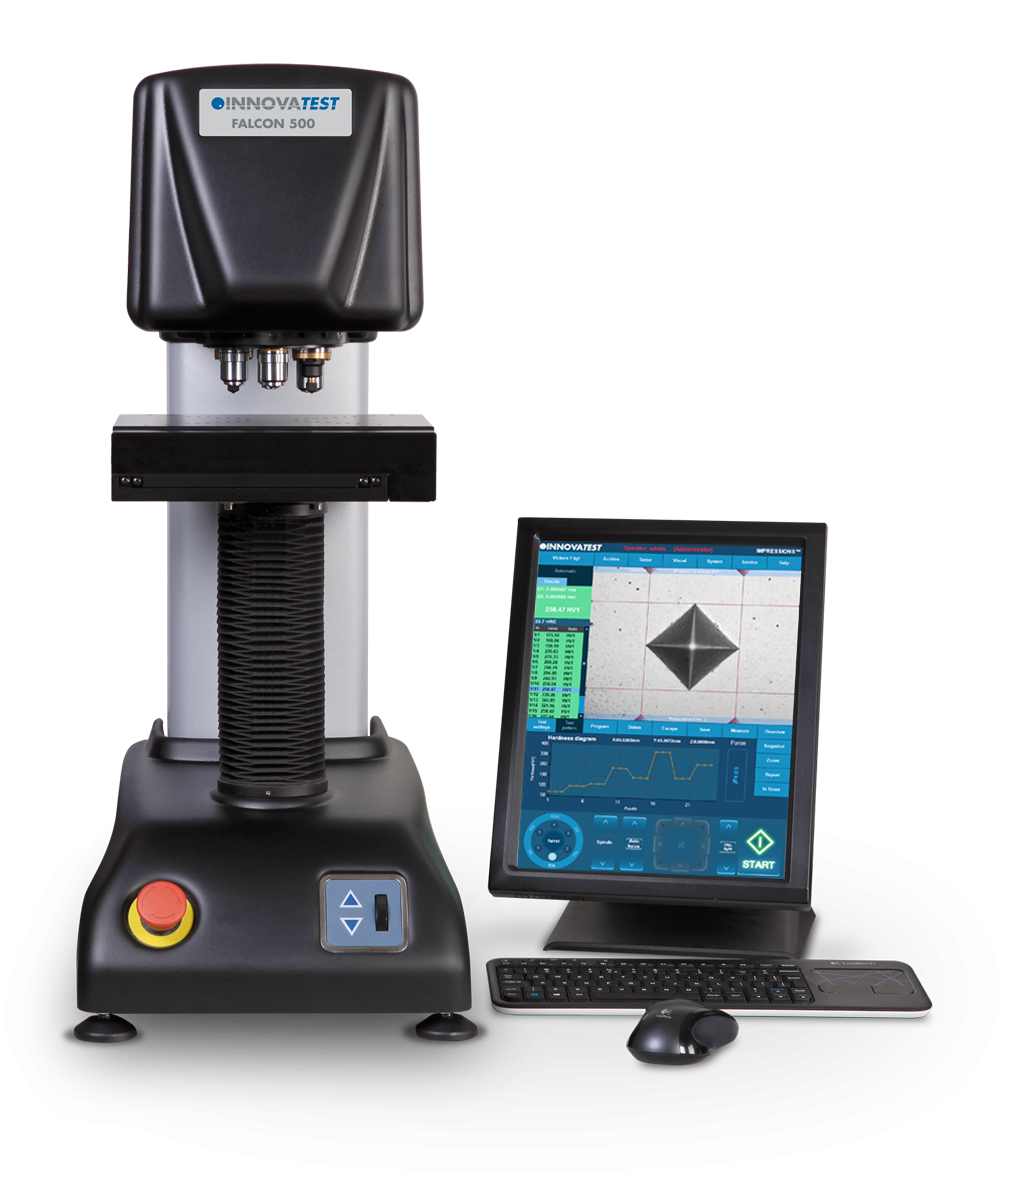 innovatest-falcon-500-front-vickers-hardness-tester